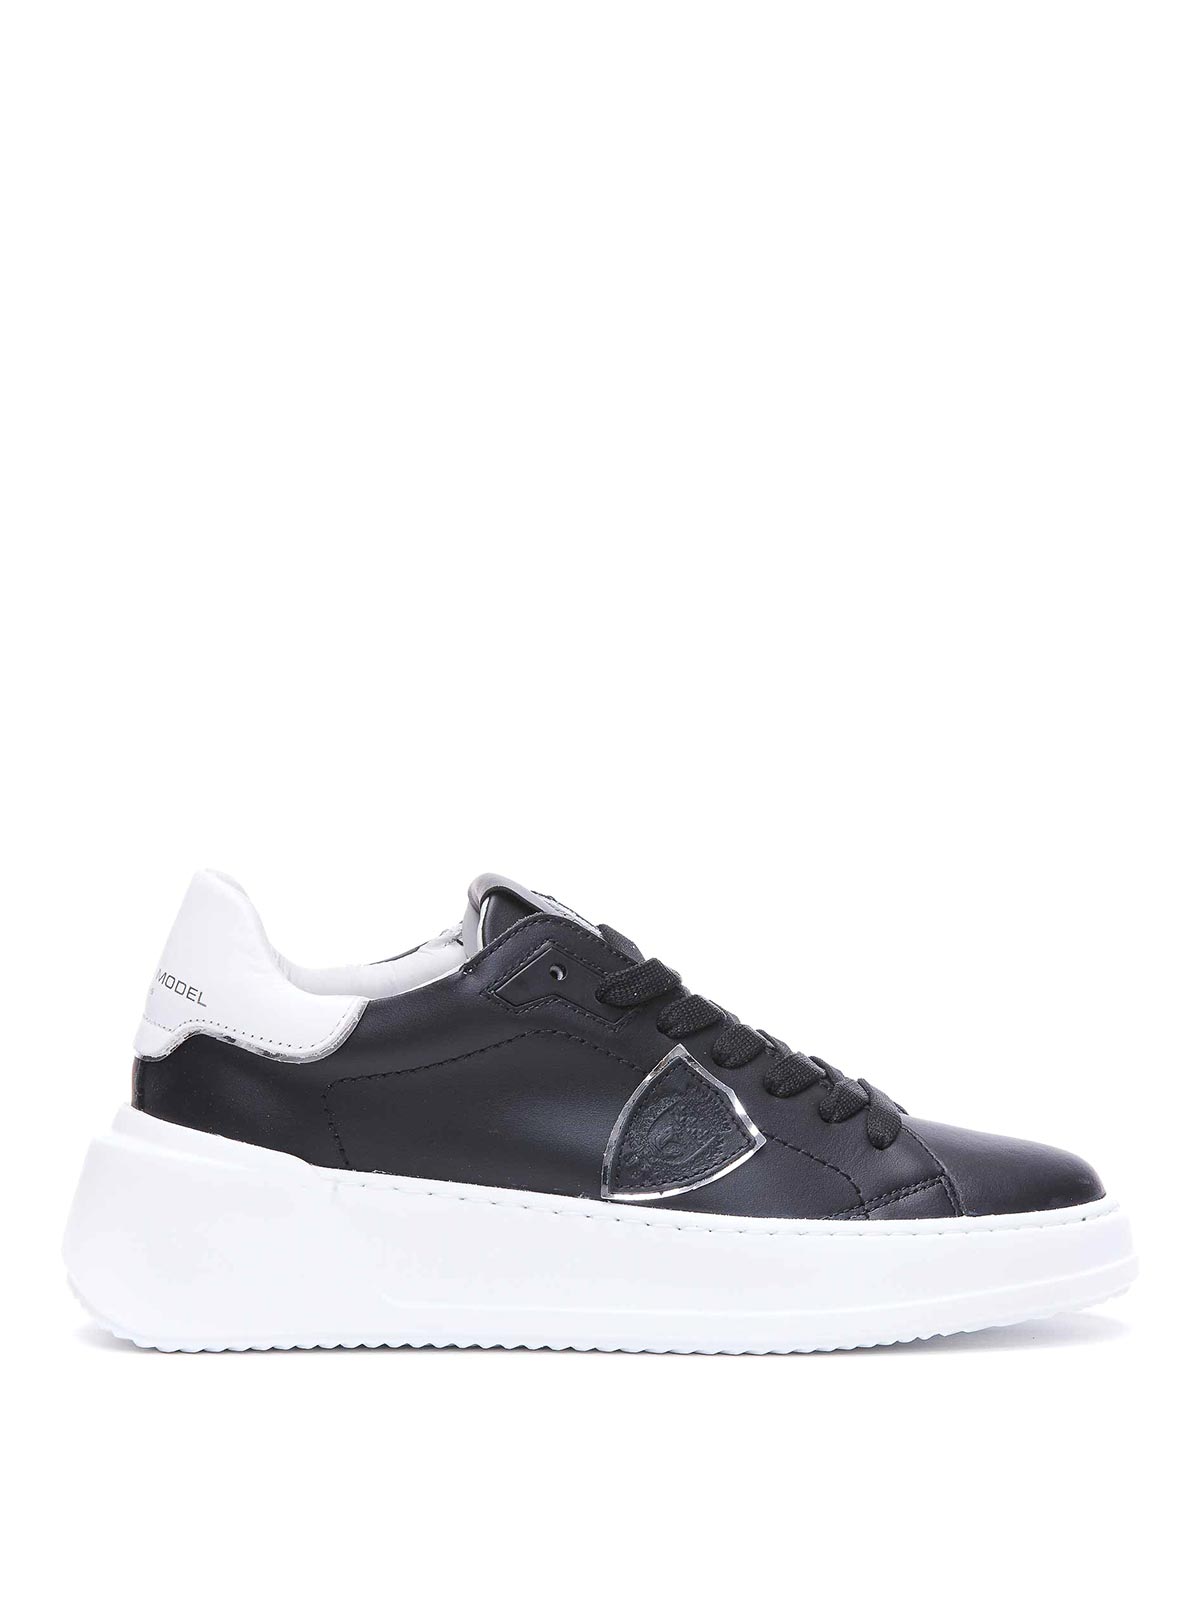 Philippe Model Leather Sneakers In Black